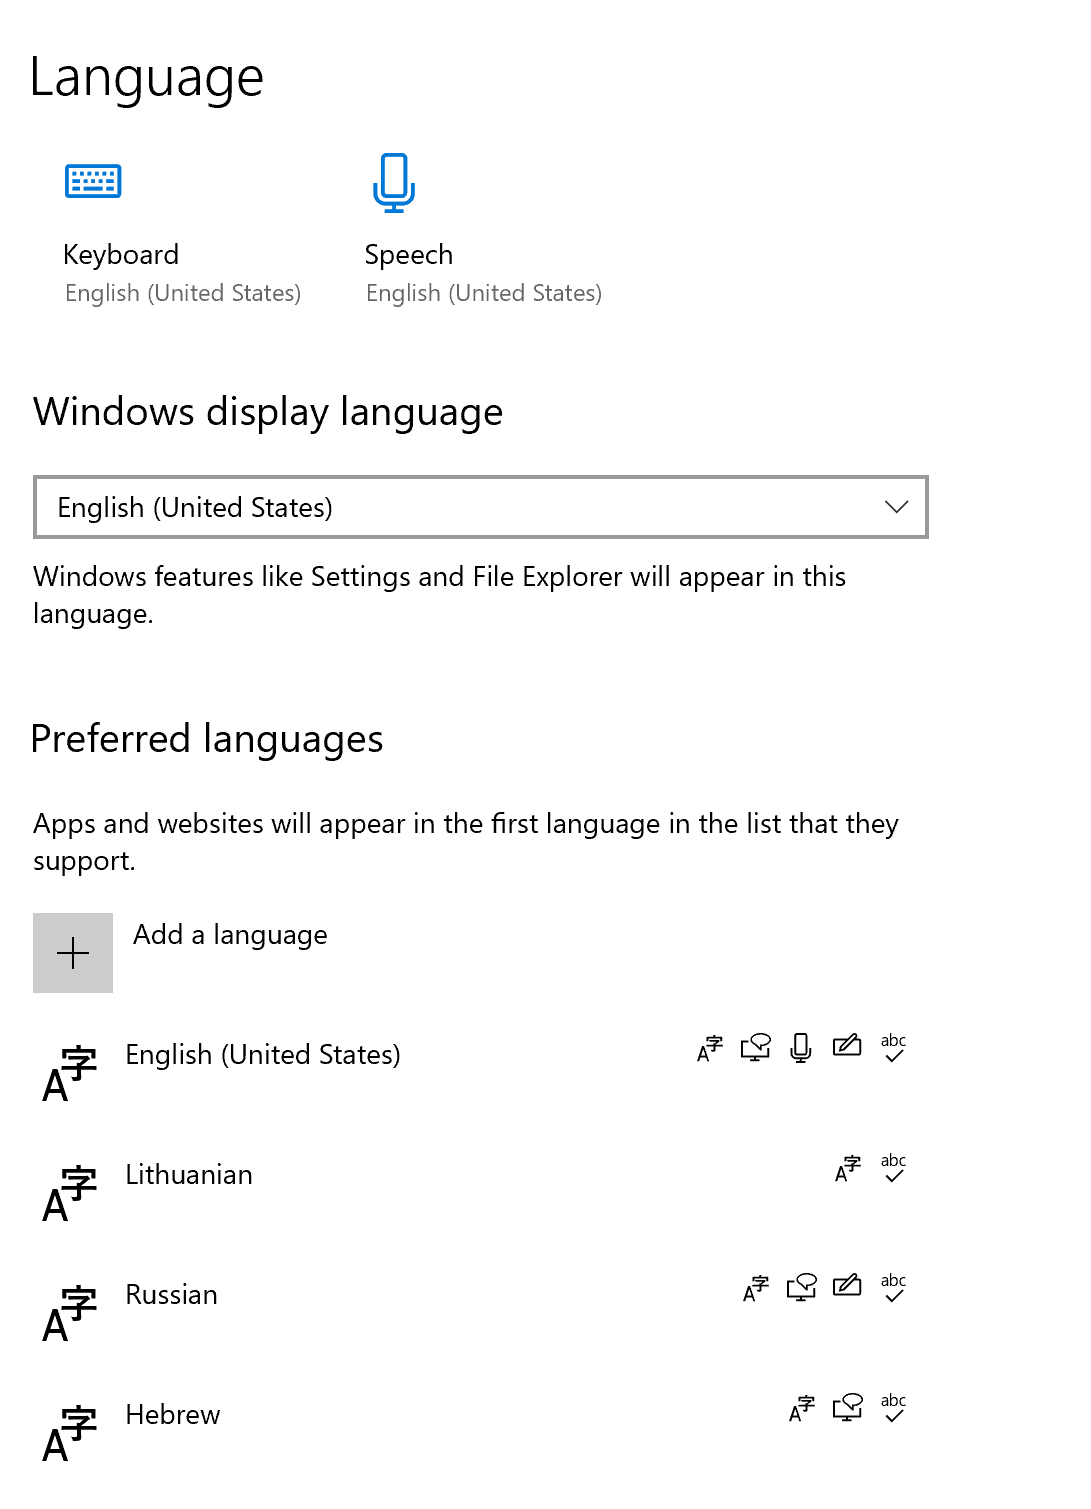 Windows 10 constantly adding random English input languages to the Language Bar 6e1ab321-2d41-479a-b2be-73fcd2854c3d?upload=true.png